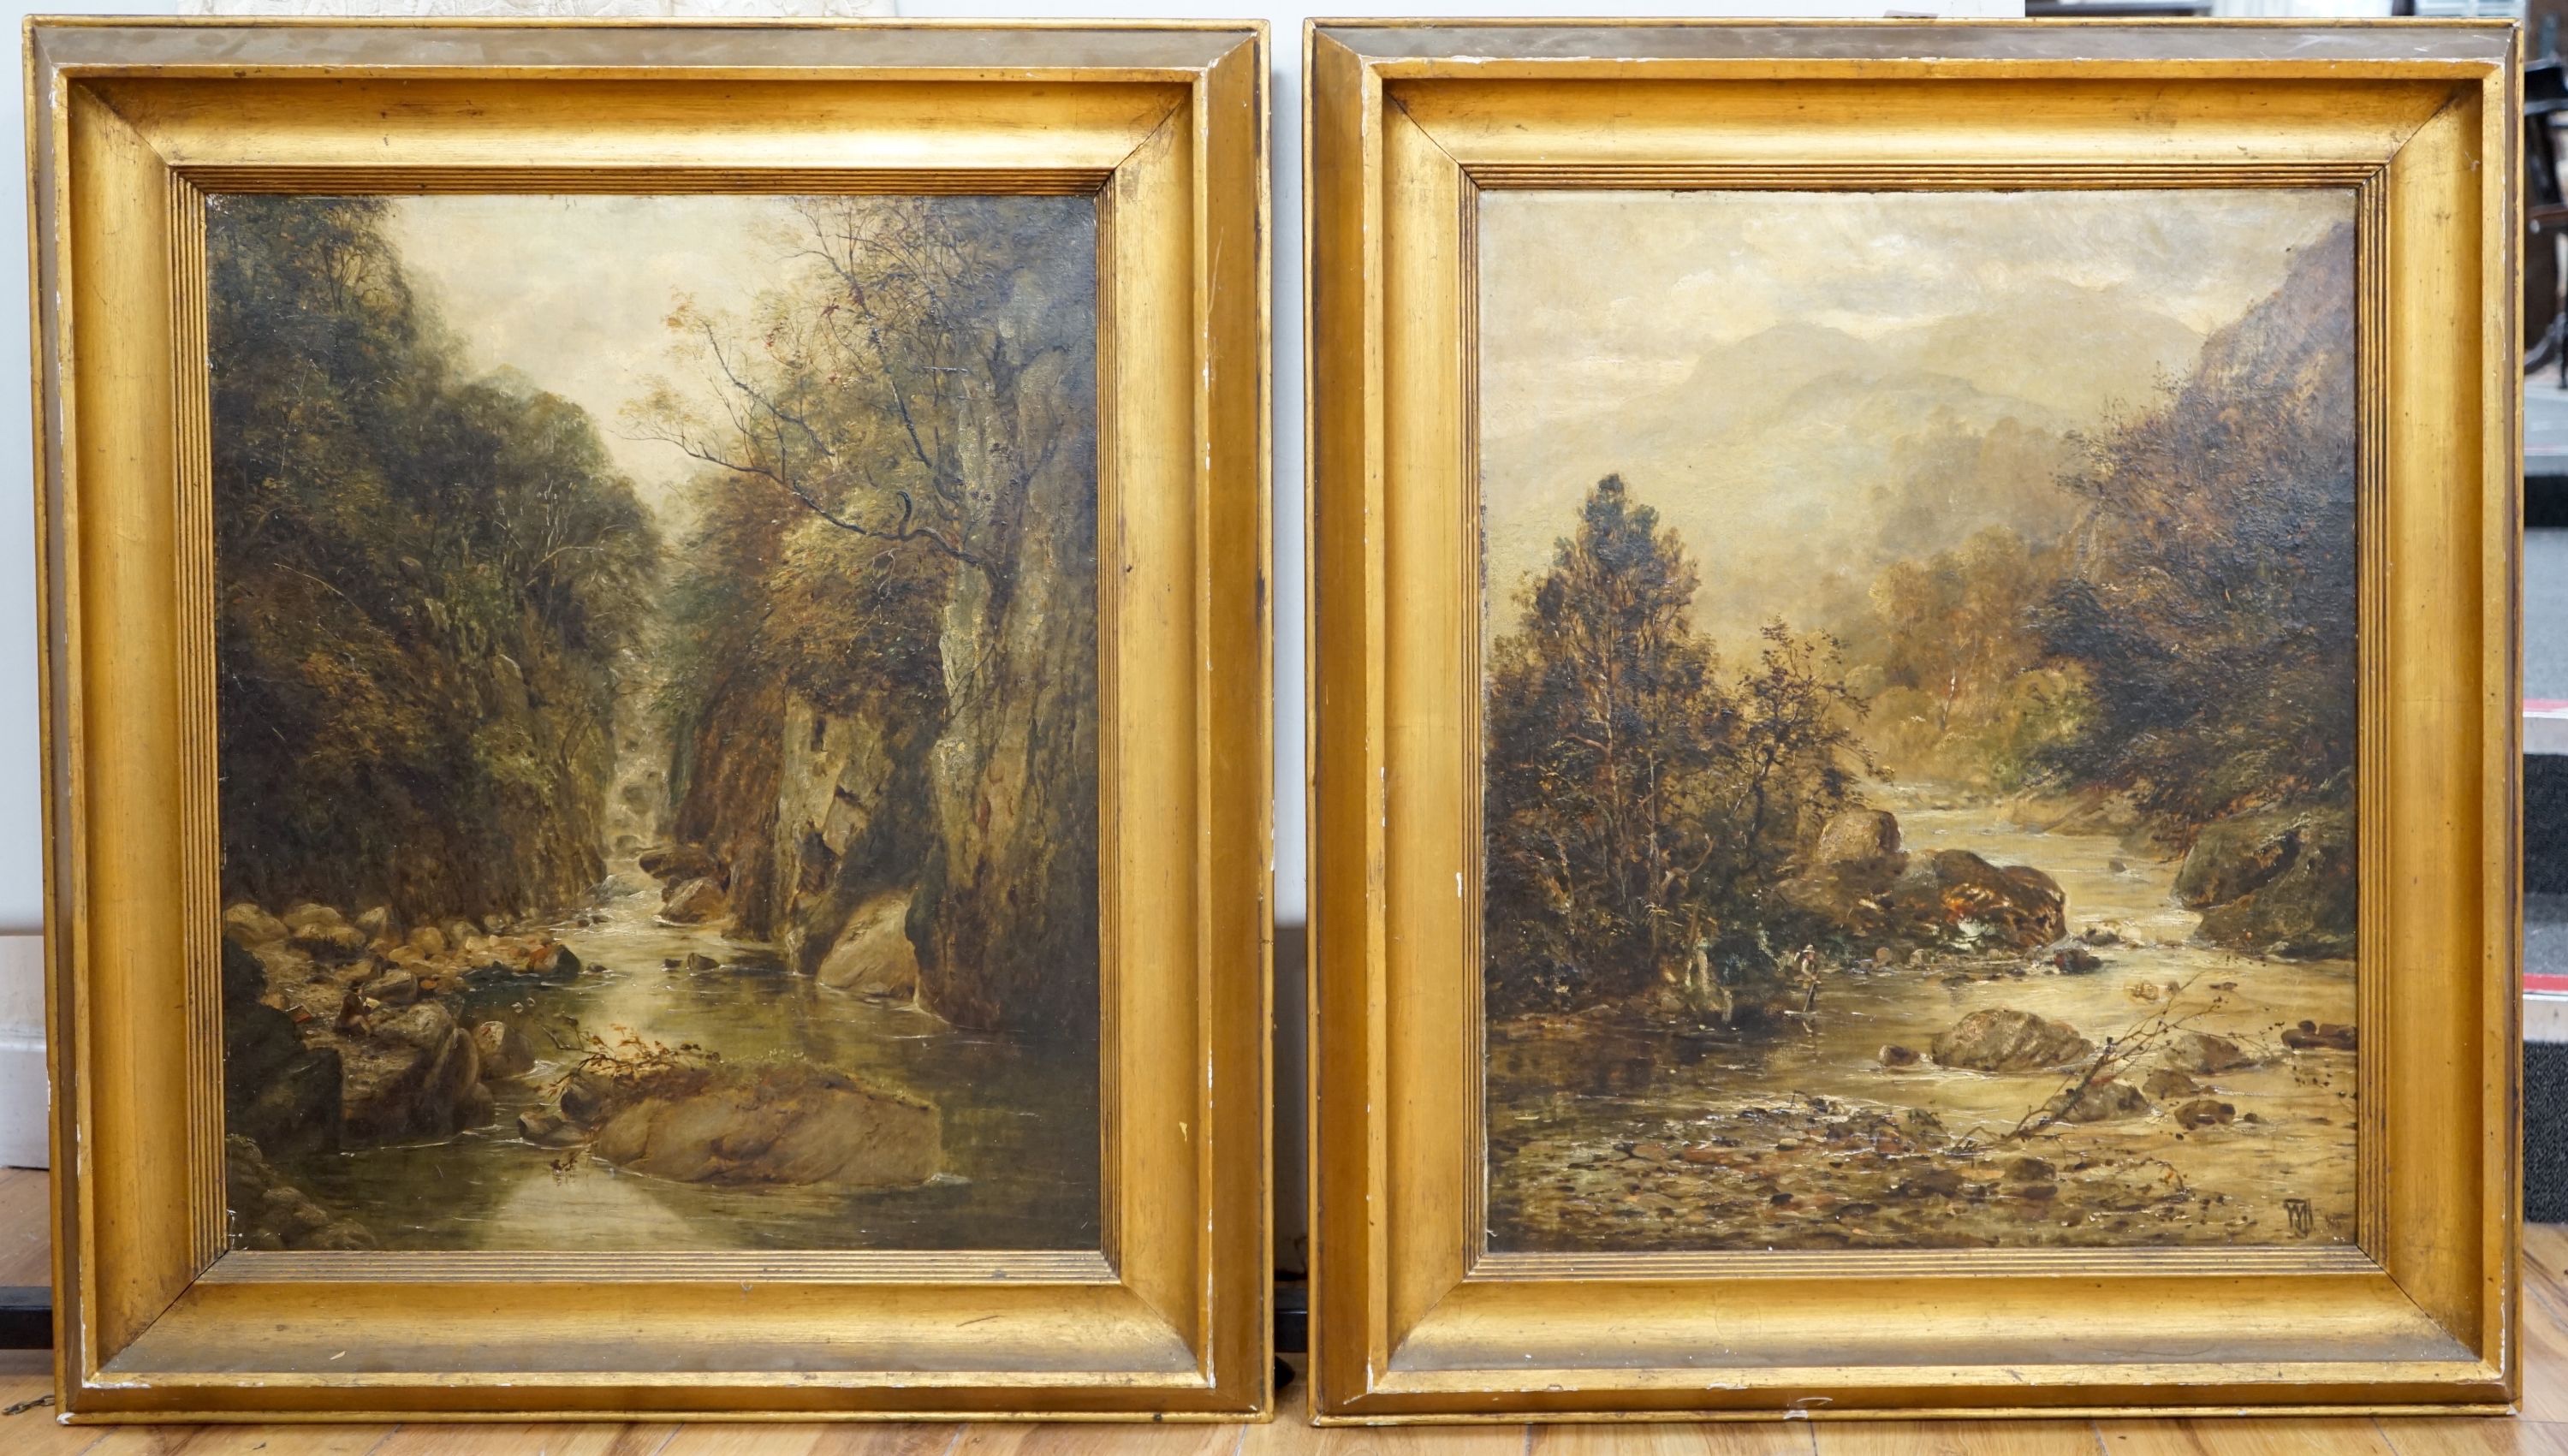 WJJ 1880, pair of oils on canvas, Angler and artist in river landscapes, one monogrammed and dated, 60 x 50cm